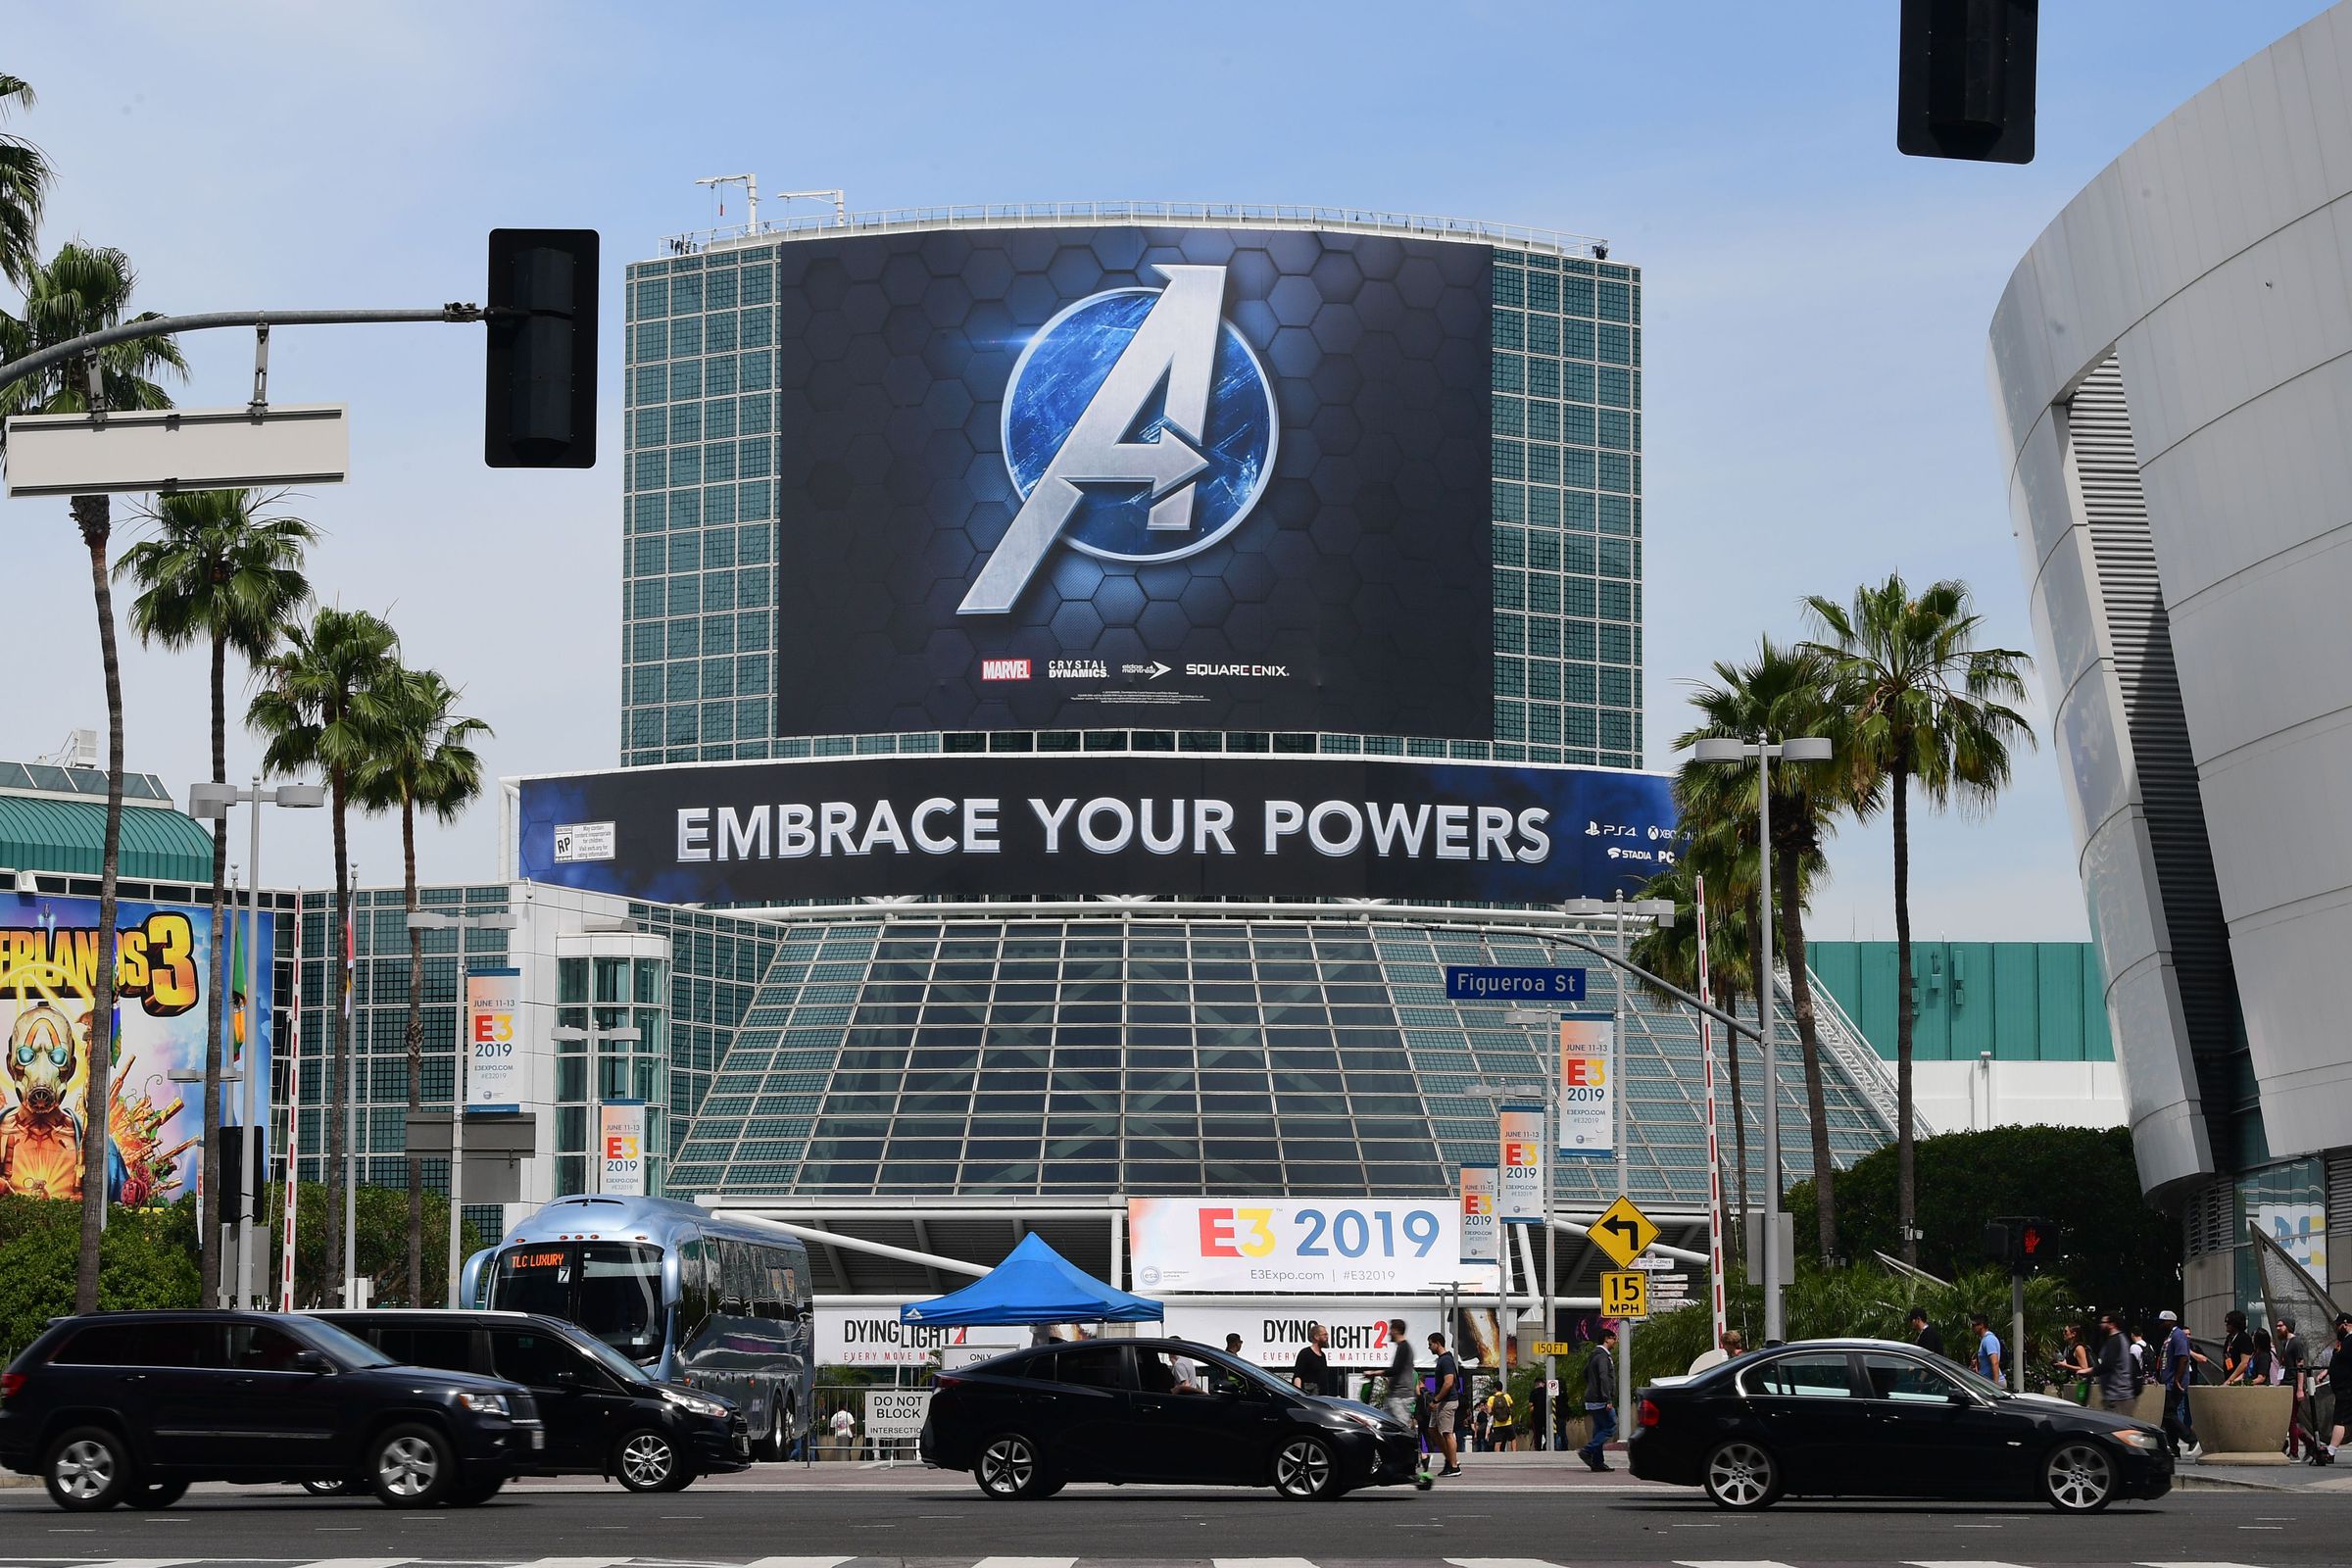 A photo of the 2019 Electronic Entertainment Expo, also known as E3, opening in Los Angeles, California.